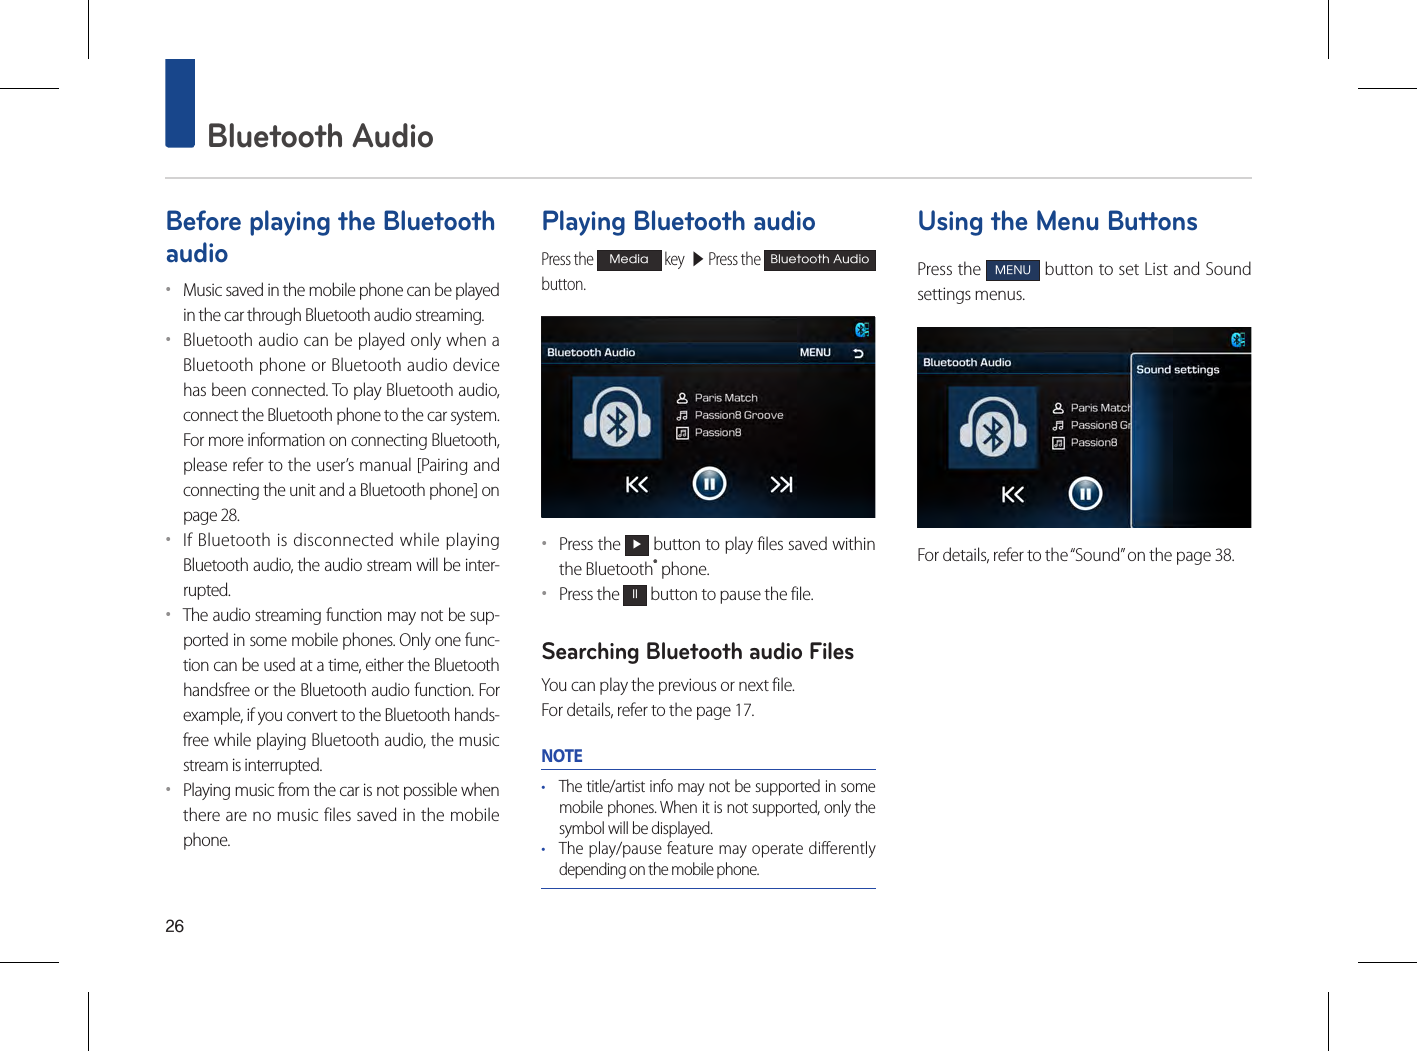 26 Bluetooth AudioBefore playing the Bluetooth audio••Music saved in the mobile phone can be played in the car through Bluetooth audio streaming. ••Bluetooth audio can be played only when a Bluetooth phone or Bluetooth audio device has been connected. To play Bluetooth audio, connect the Bluetooth phone to the car system. For more information on connecting Bluetooth, please refer to the user’s manual [Pairing and connecting the unit and a Bluetooth phone] on page 28. ••If Bluetooth is disconnected while playing Bluetooth audio, the audio stream will be inter-rupted. ••The audio streaming function may not be sup-ported in some mobile phones. Only one func-tion can be used at a time, either the Bluetooth handsfree or the Bluetooth audio function. For example, if you convert to the Bluetooth hands-free while playing Bluetooth audio, the music stream is interrupted. ••Playing music from the car is not possible when there are no music files saved in the mobile phone. Playing Bluetooth audioPress the Media key  ▶ Press the Bluetooth Audio button.••Press the ▶ button to play files saved within the Bluetooth® phone.••Press the ll button to pause the file.Searching Bluetooth audio FilesYou can play the previous or next file. For details, refer to the page 17.NOTE• The title/artist info may not be supported in some mobile phones. When it is not supported, only the symbol will be displayed.• The play/pause feature may operate differently depending on the mobile phone.Using the Menu ButtonsPress the MENU button to set List and Sound settings menus.For details, refer to the “Sound” on the page 38.